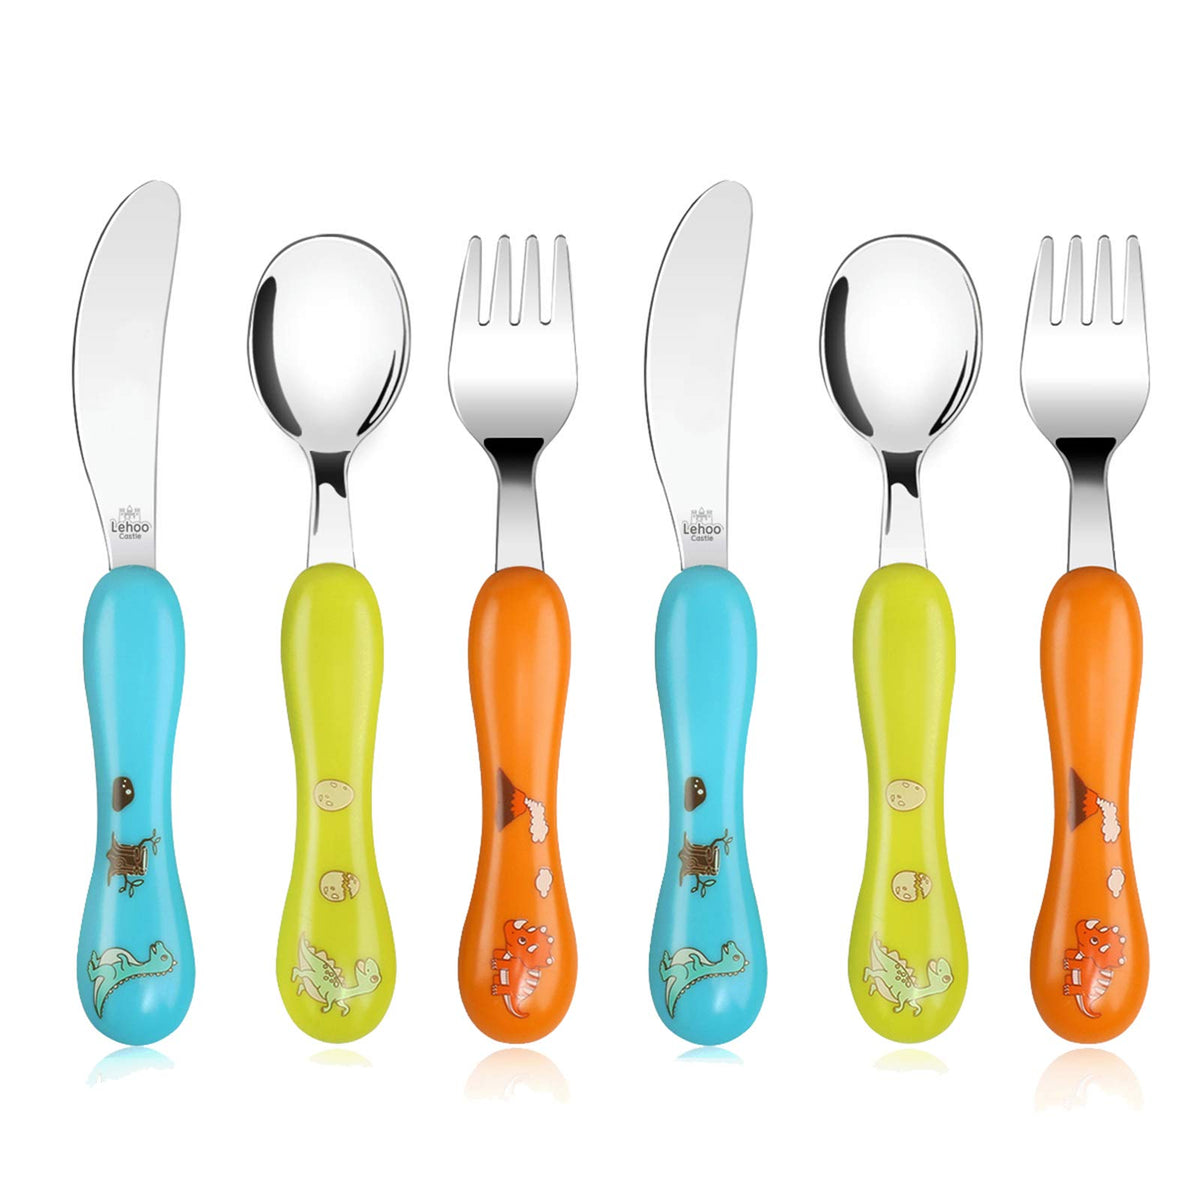 Lehoo Castle Toddler Cutlery, 6pcs Stainless Steel Dinosaurs Children's Cutlery Kids Cutlery Flatware, Incudes 2 x Spoons, 2 x Forks, 2 x Knives